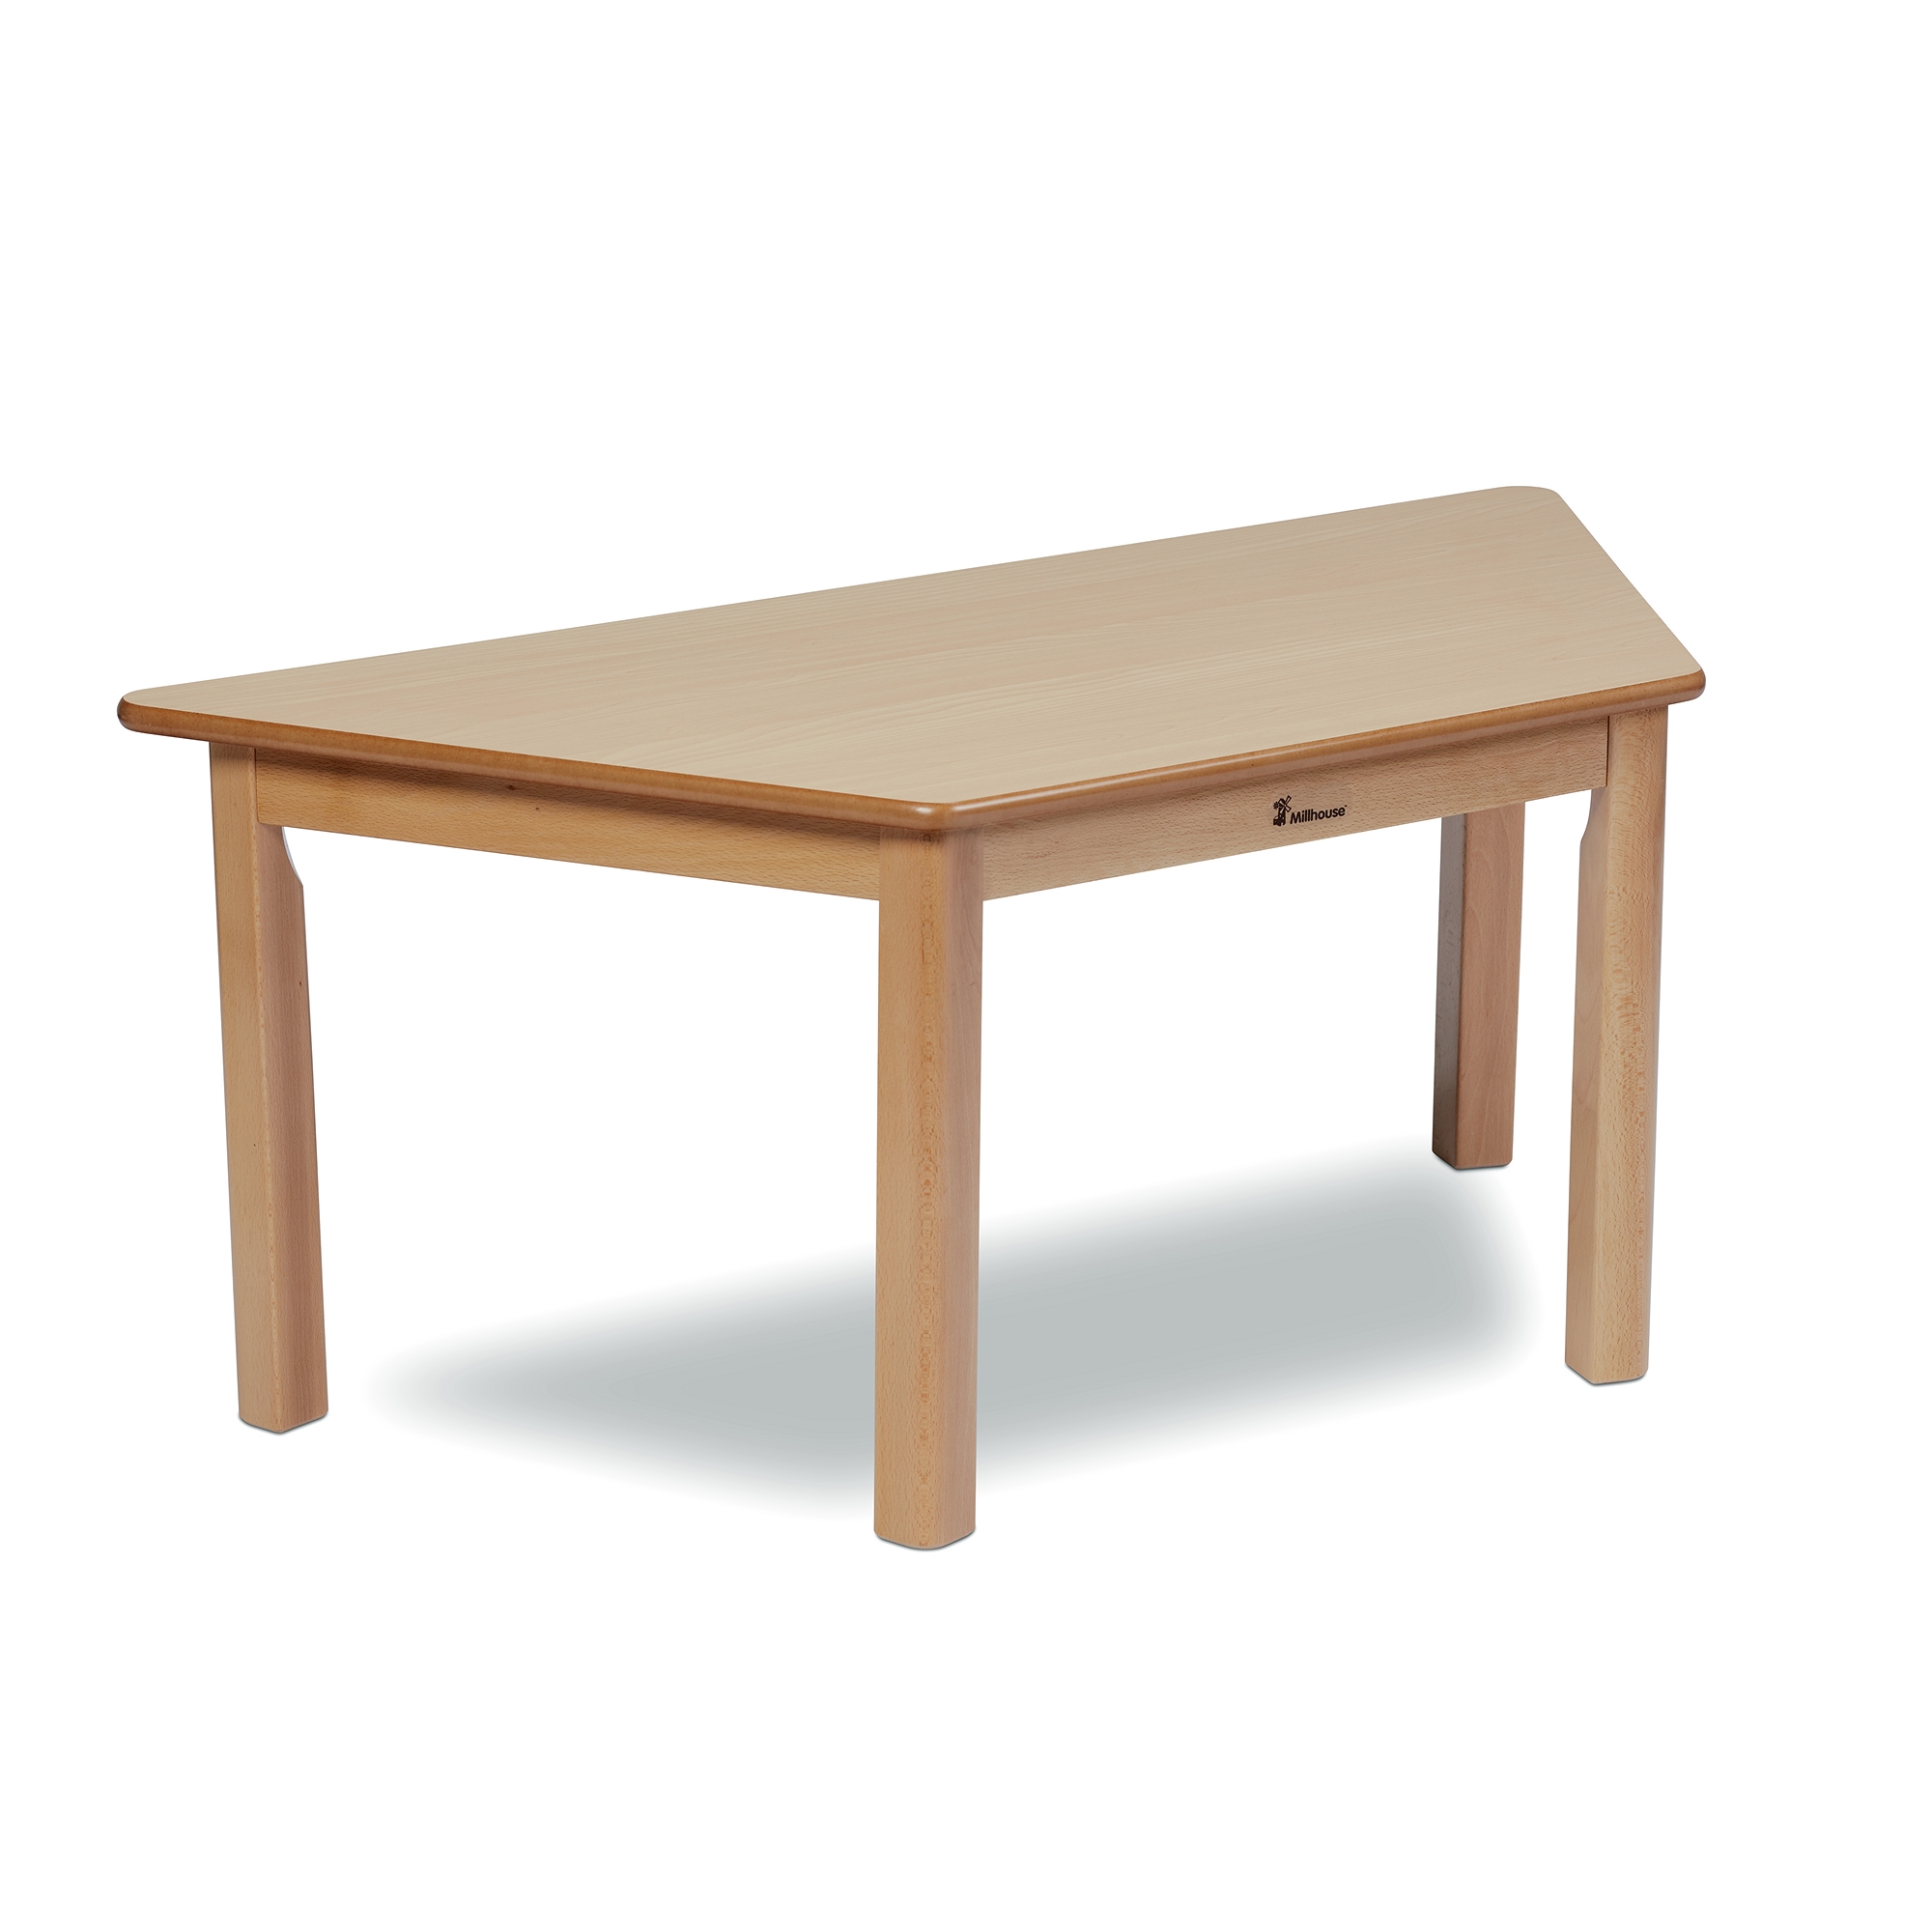 Playscapes Trapezoid Table - 460mm Height